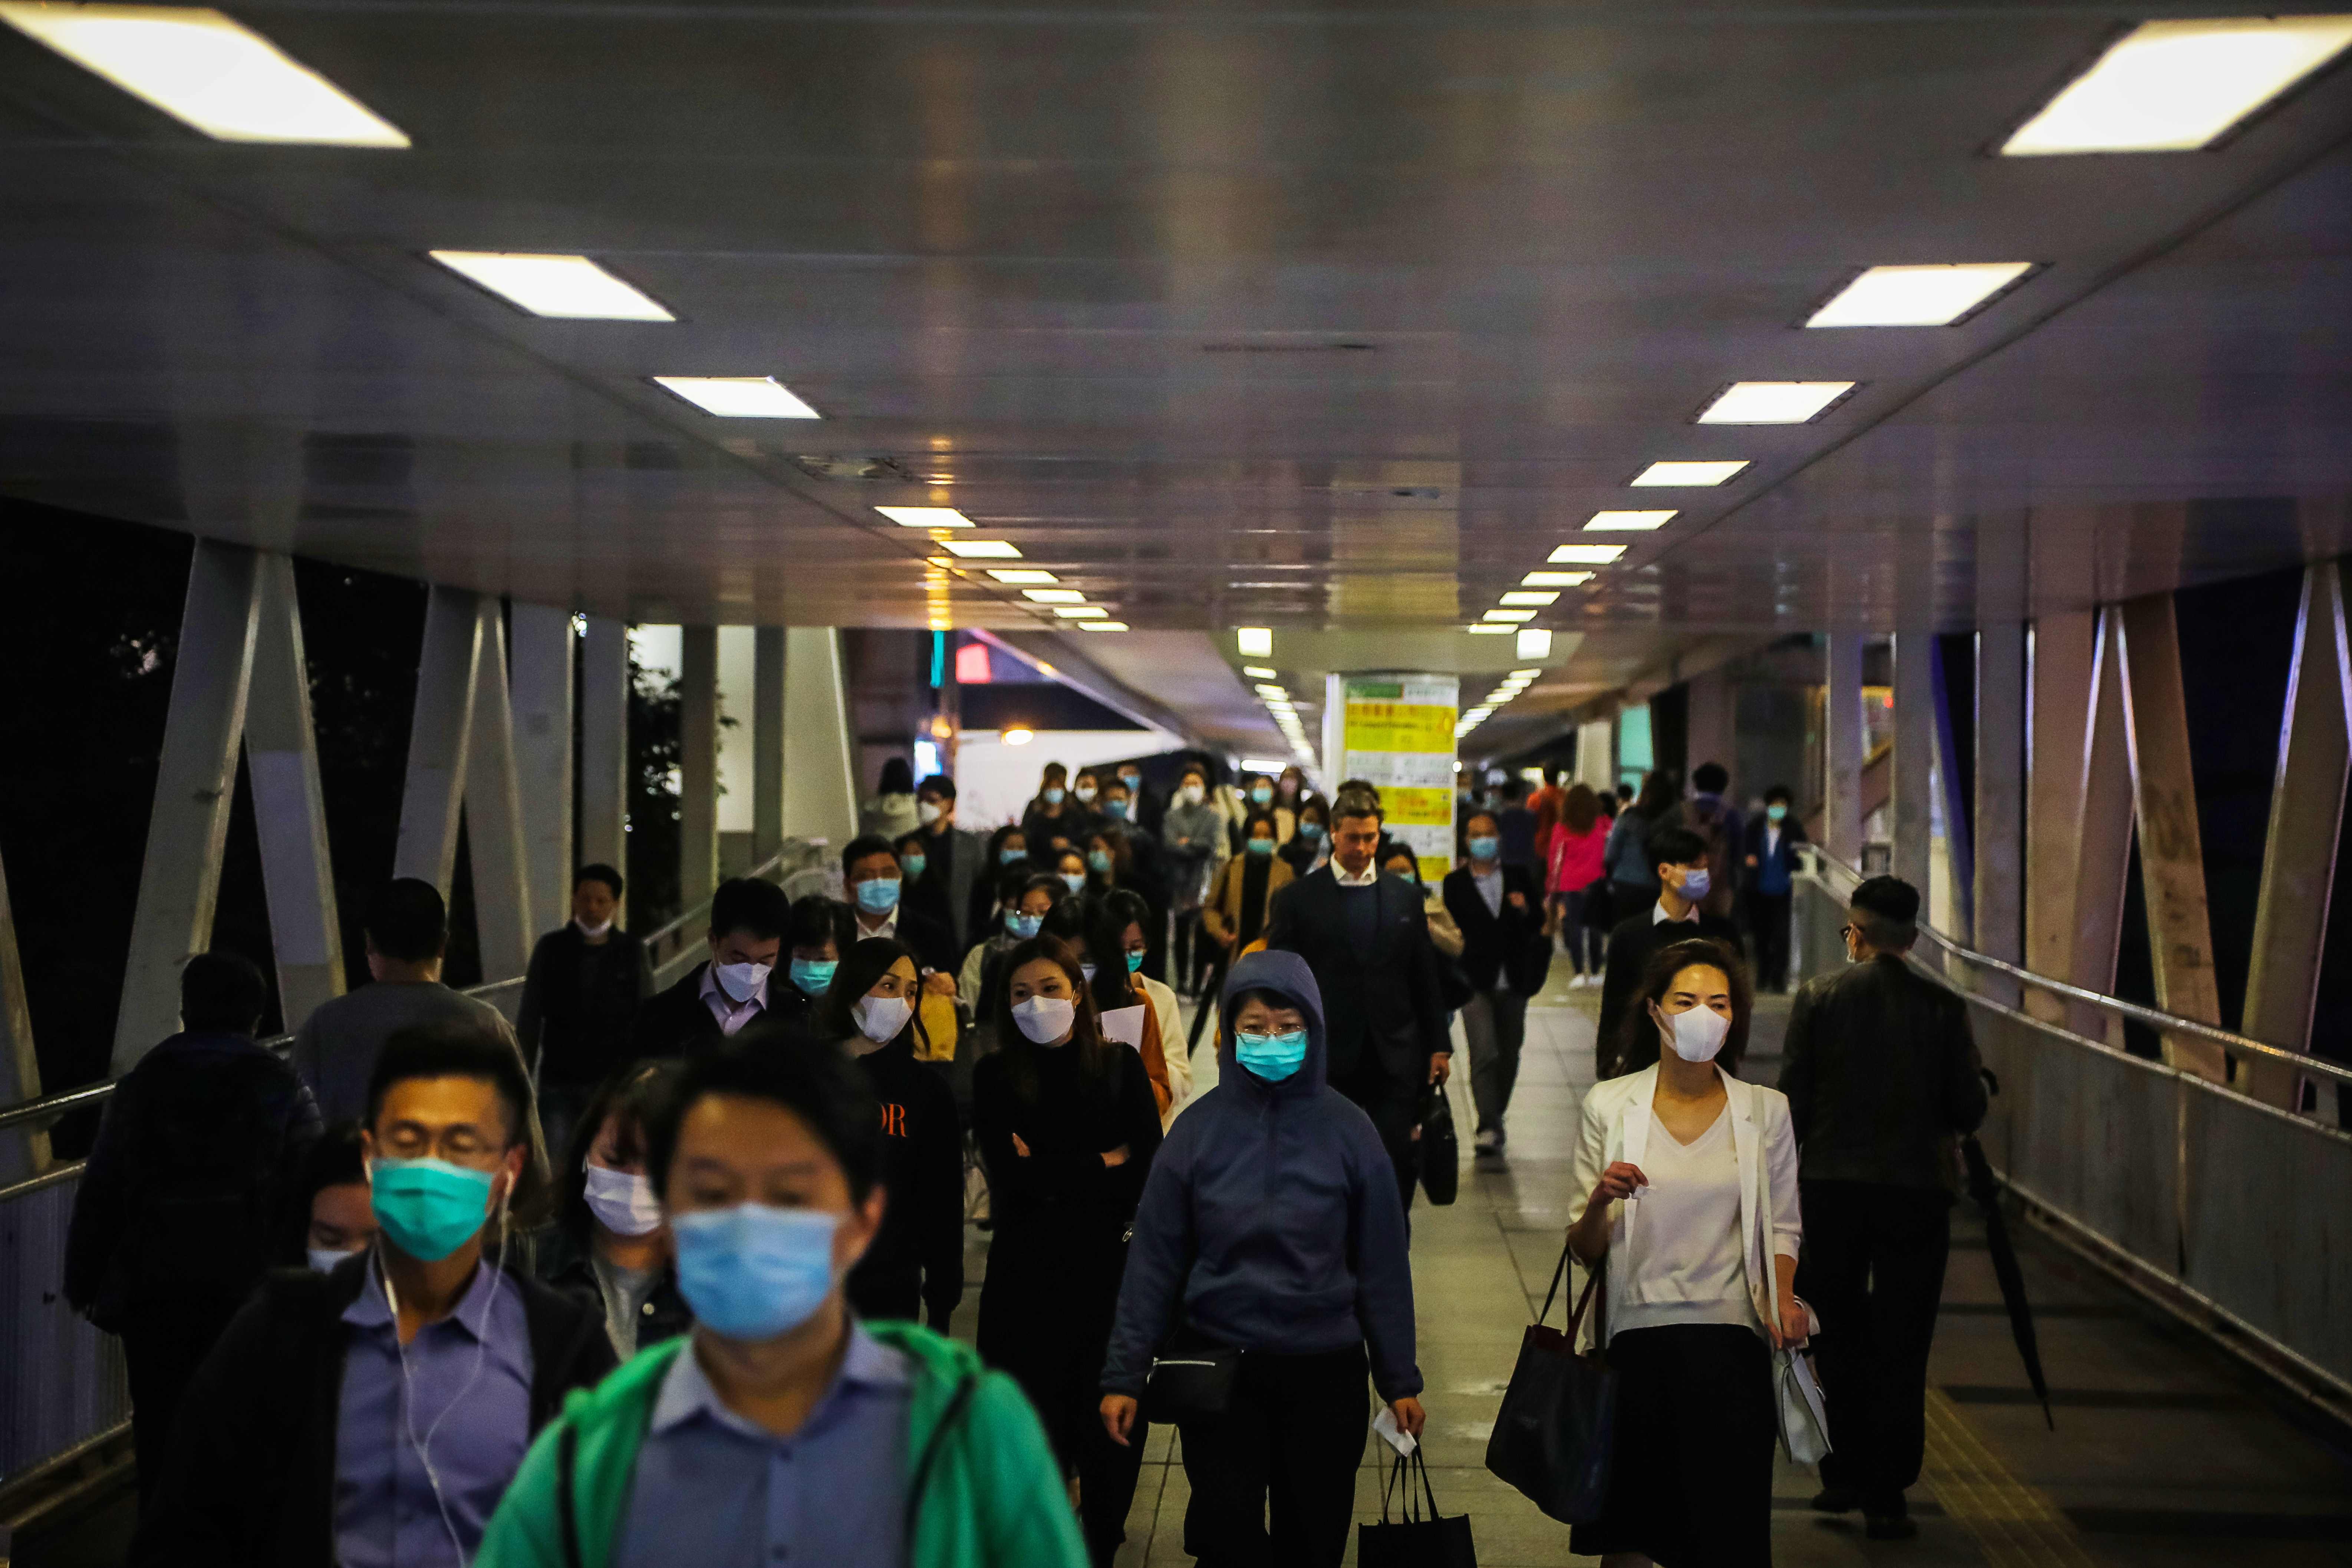 People wear masks during rush hour in Hong Kong on March 4, amid concerns about Covid-19. Photo: AFP